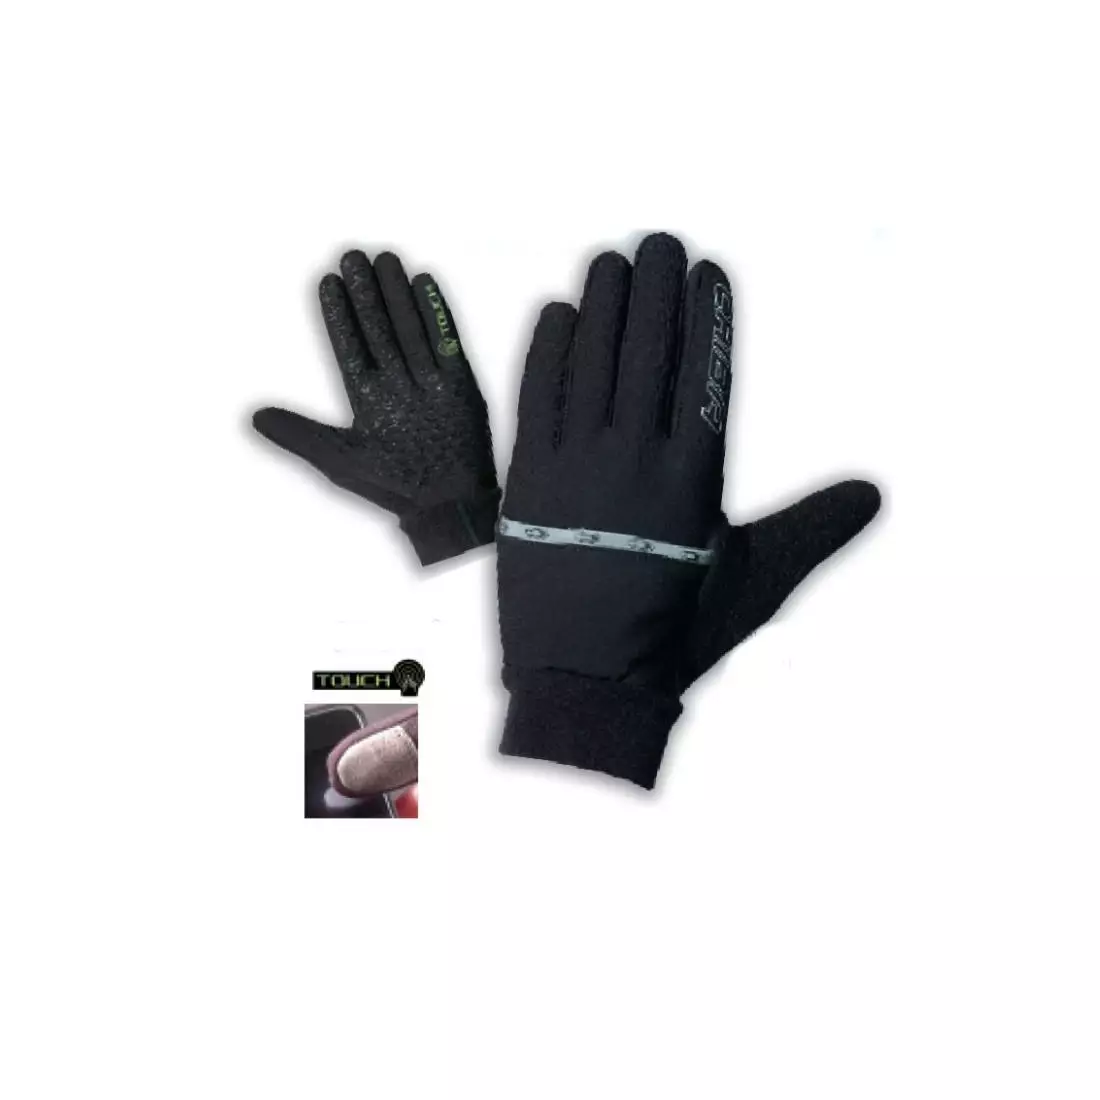 CHIBA ULTIMATE TOUCH winter cycling gloves, black